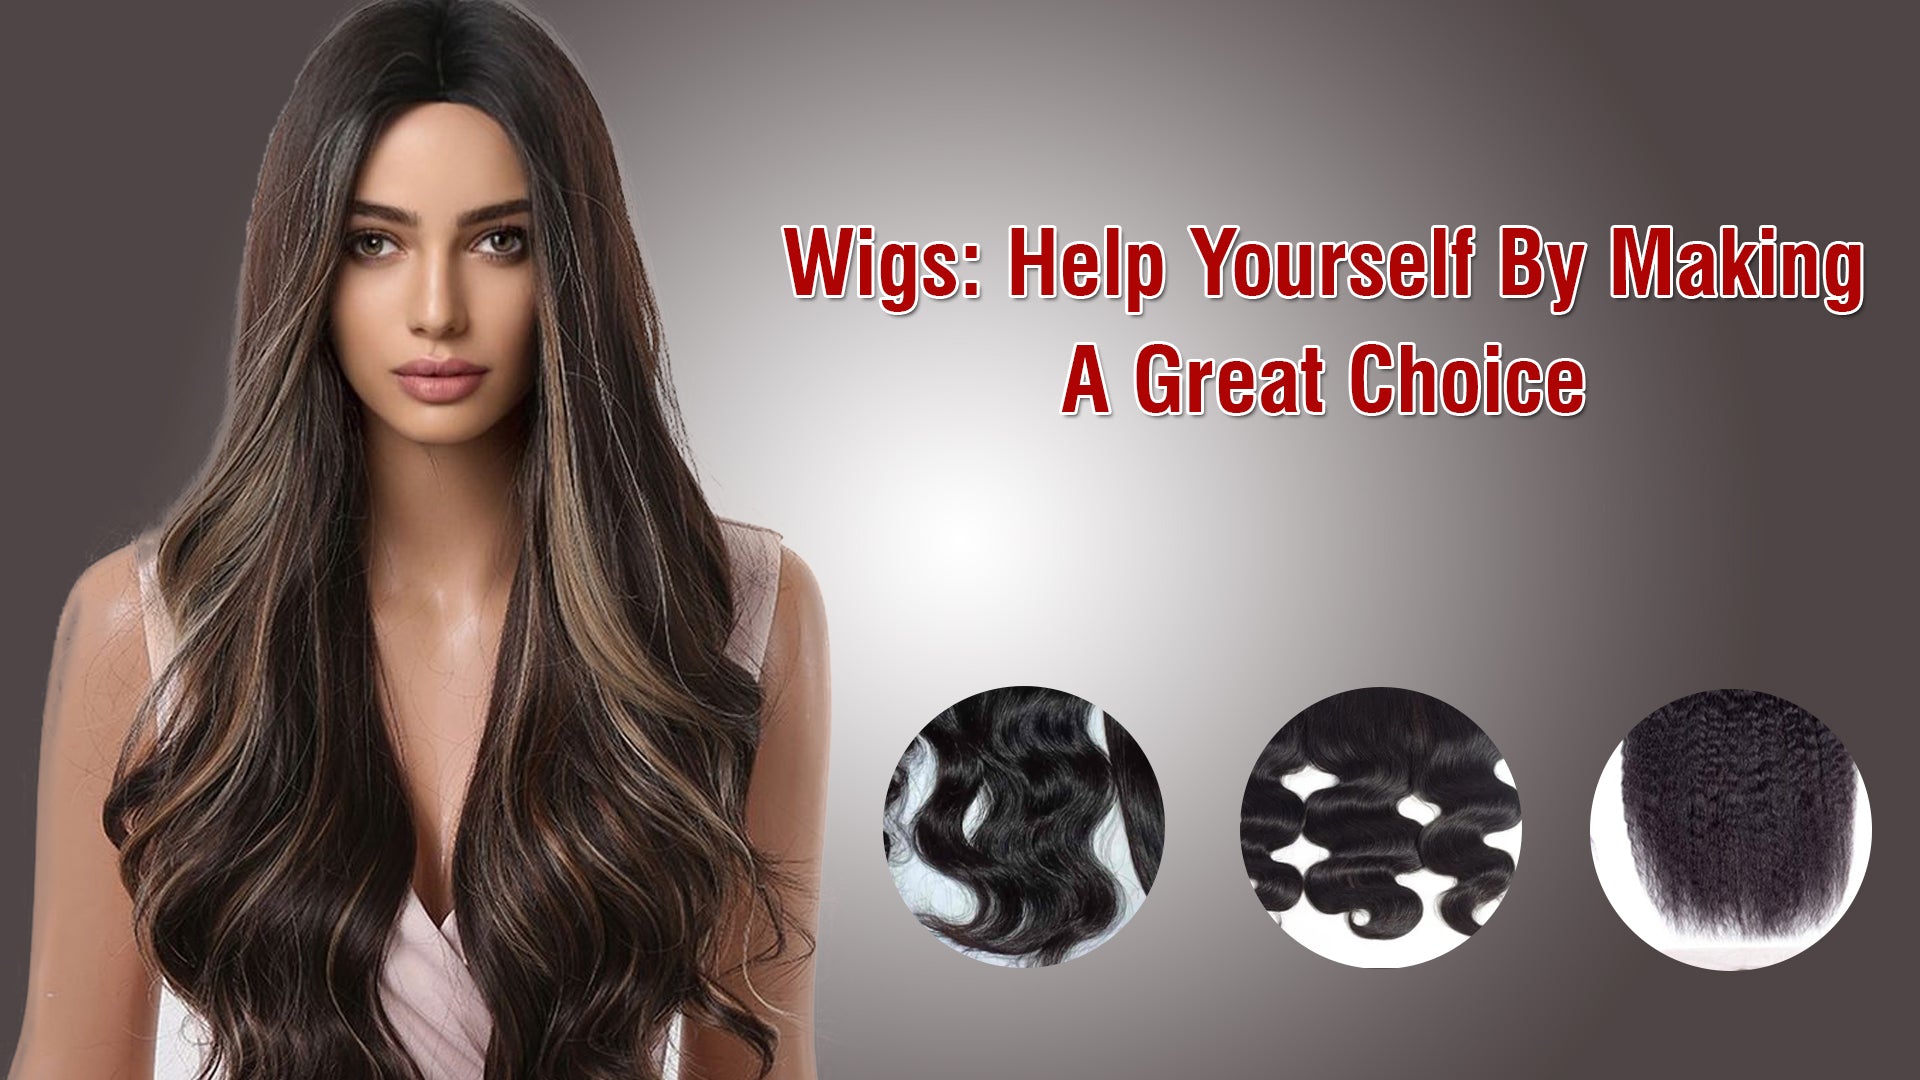 Wigs: Help Yourself By Making A Great Choice